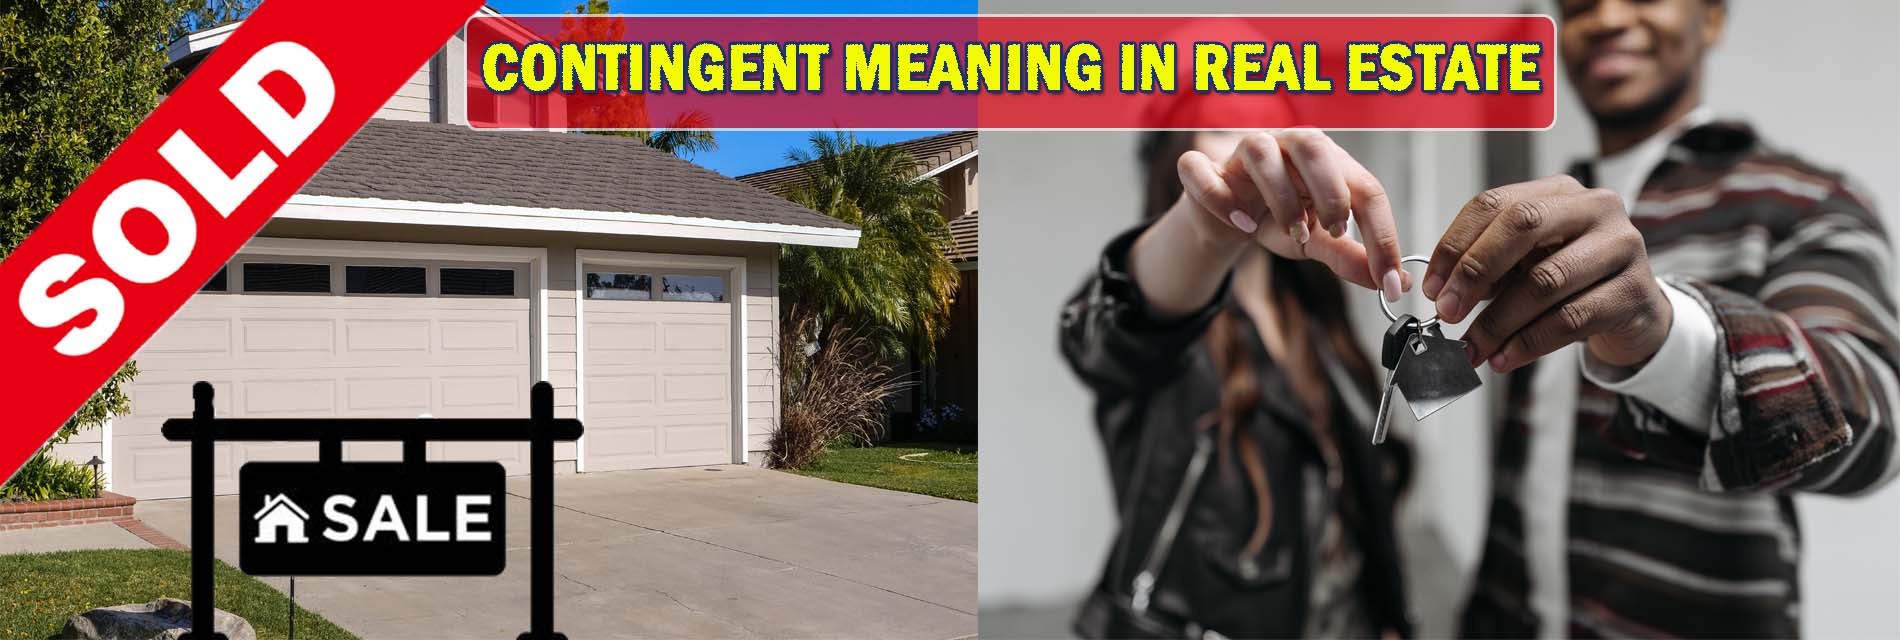 Contingent Meaning in Real Estate